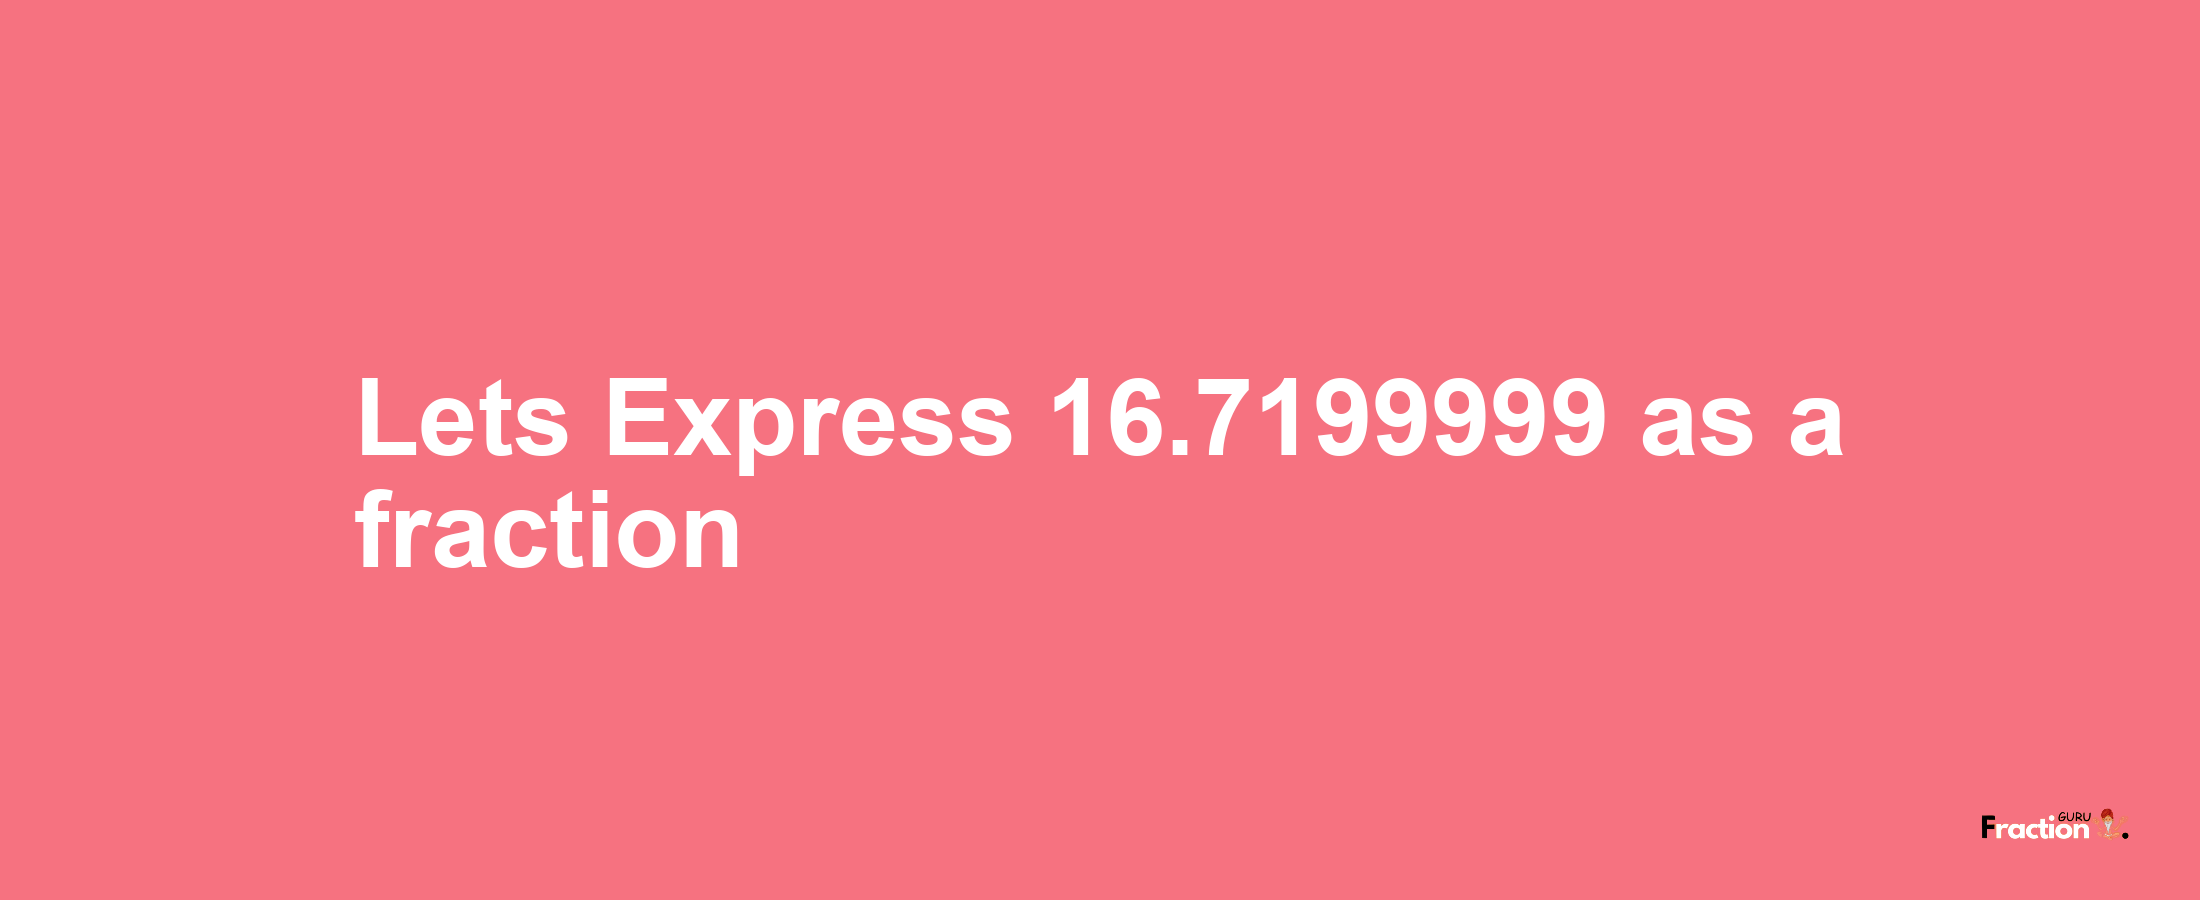 Lets Express 16.7199999 as afraction